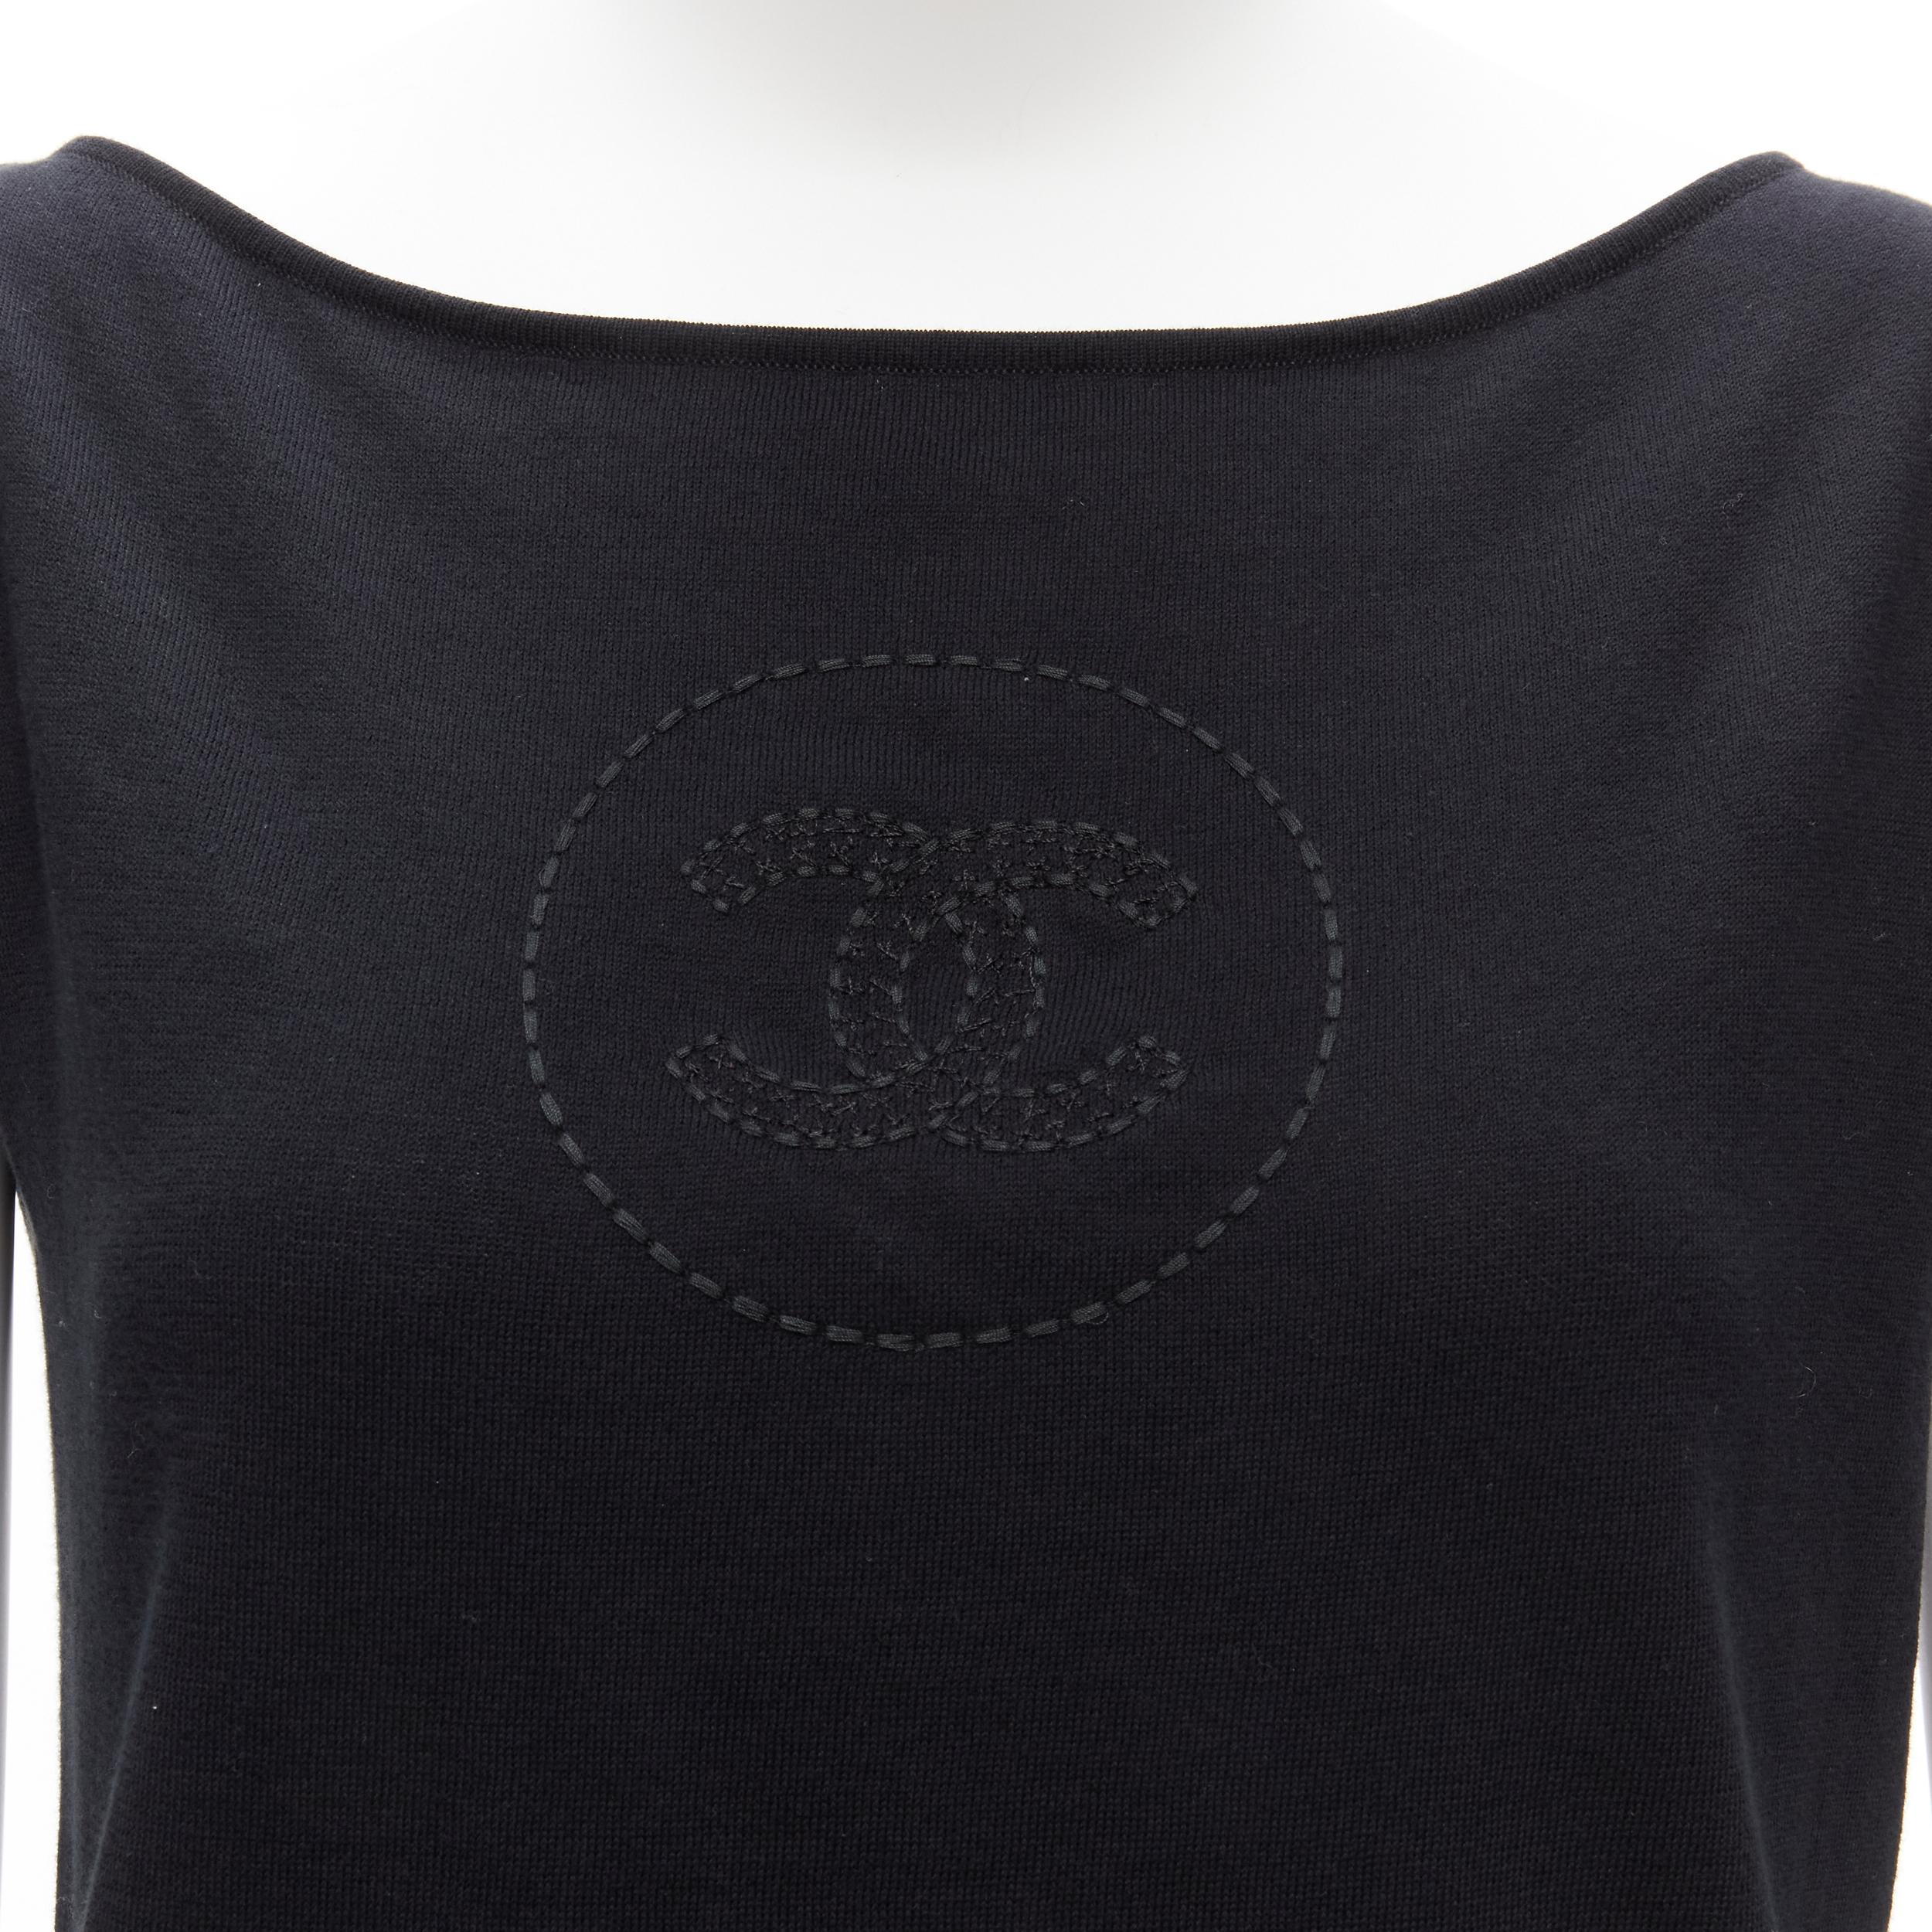 CHANEL 07P Vintage black CC logo topstitch cotton boat neck top FR36 S
Reference: TGAS/D00303
Brand: Chanel
Designer: Karl Lagerfeld
Collection: 07P
Material: Cotton
Color: Black
Pattern: Solid
Closure: Pullover
Extra Details: Boxy cut gives a